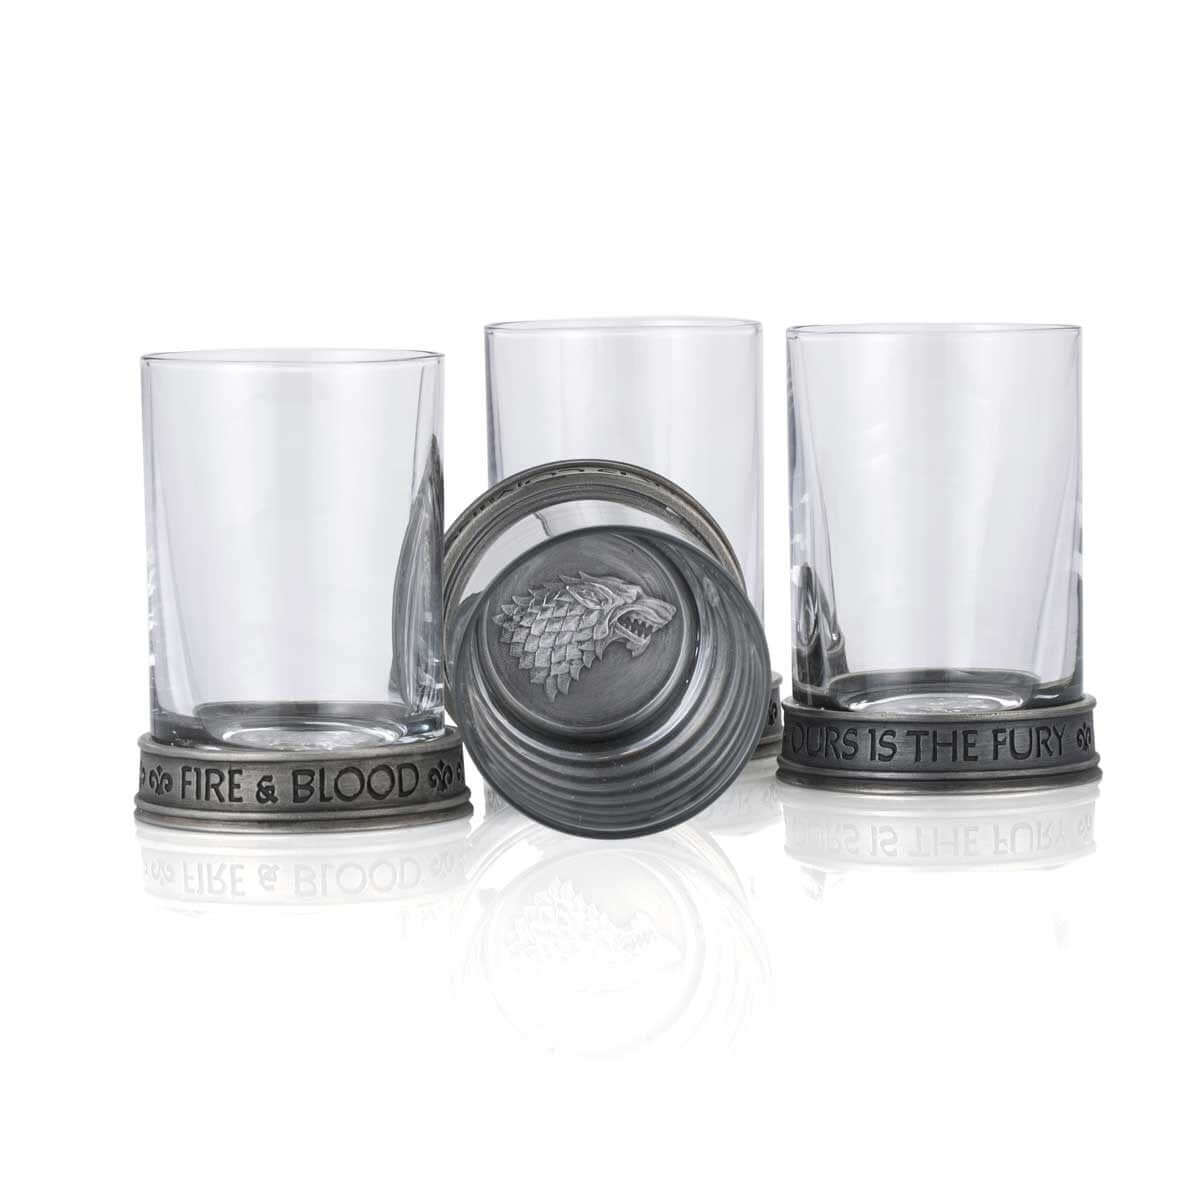 House Sigils Shot Glass Quartet - Game of Thrones Collectible Gift